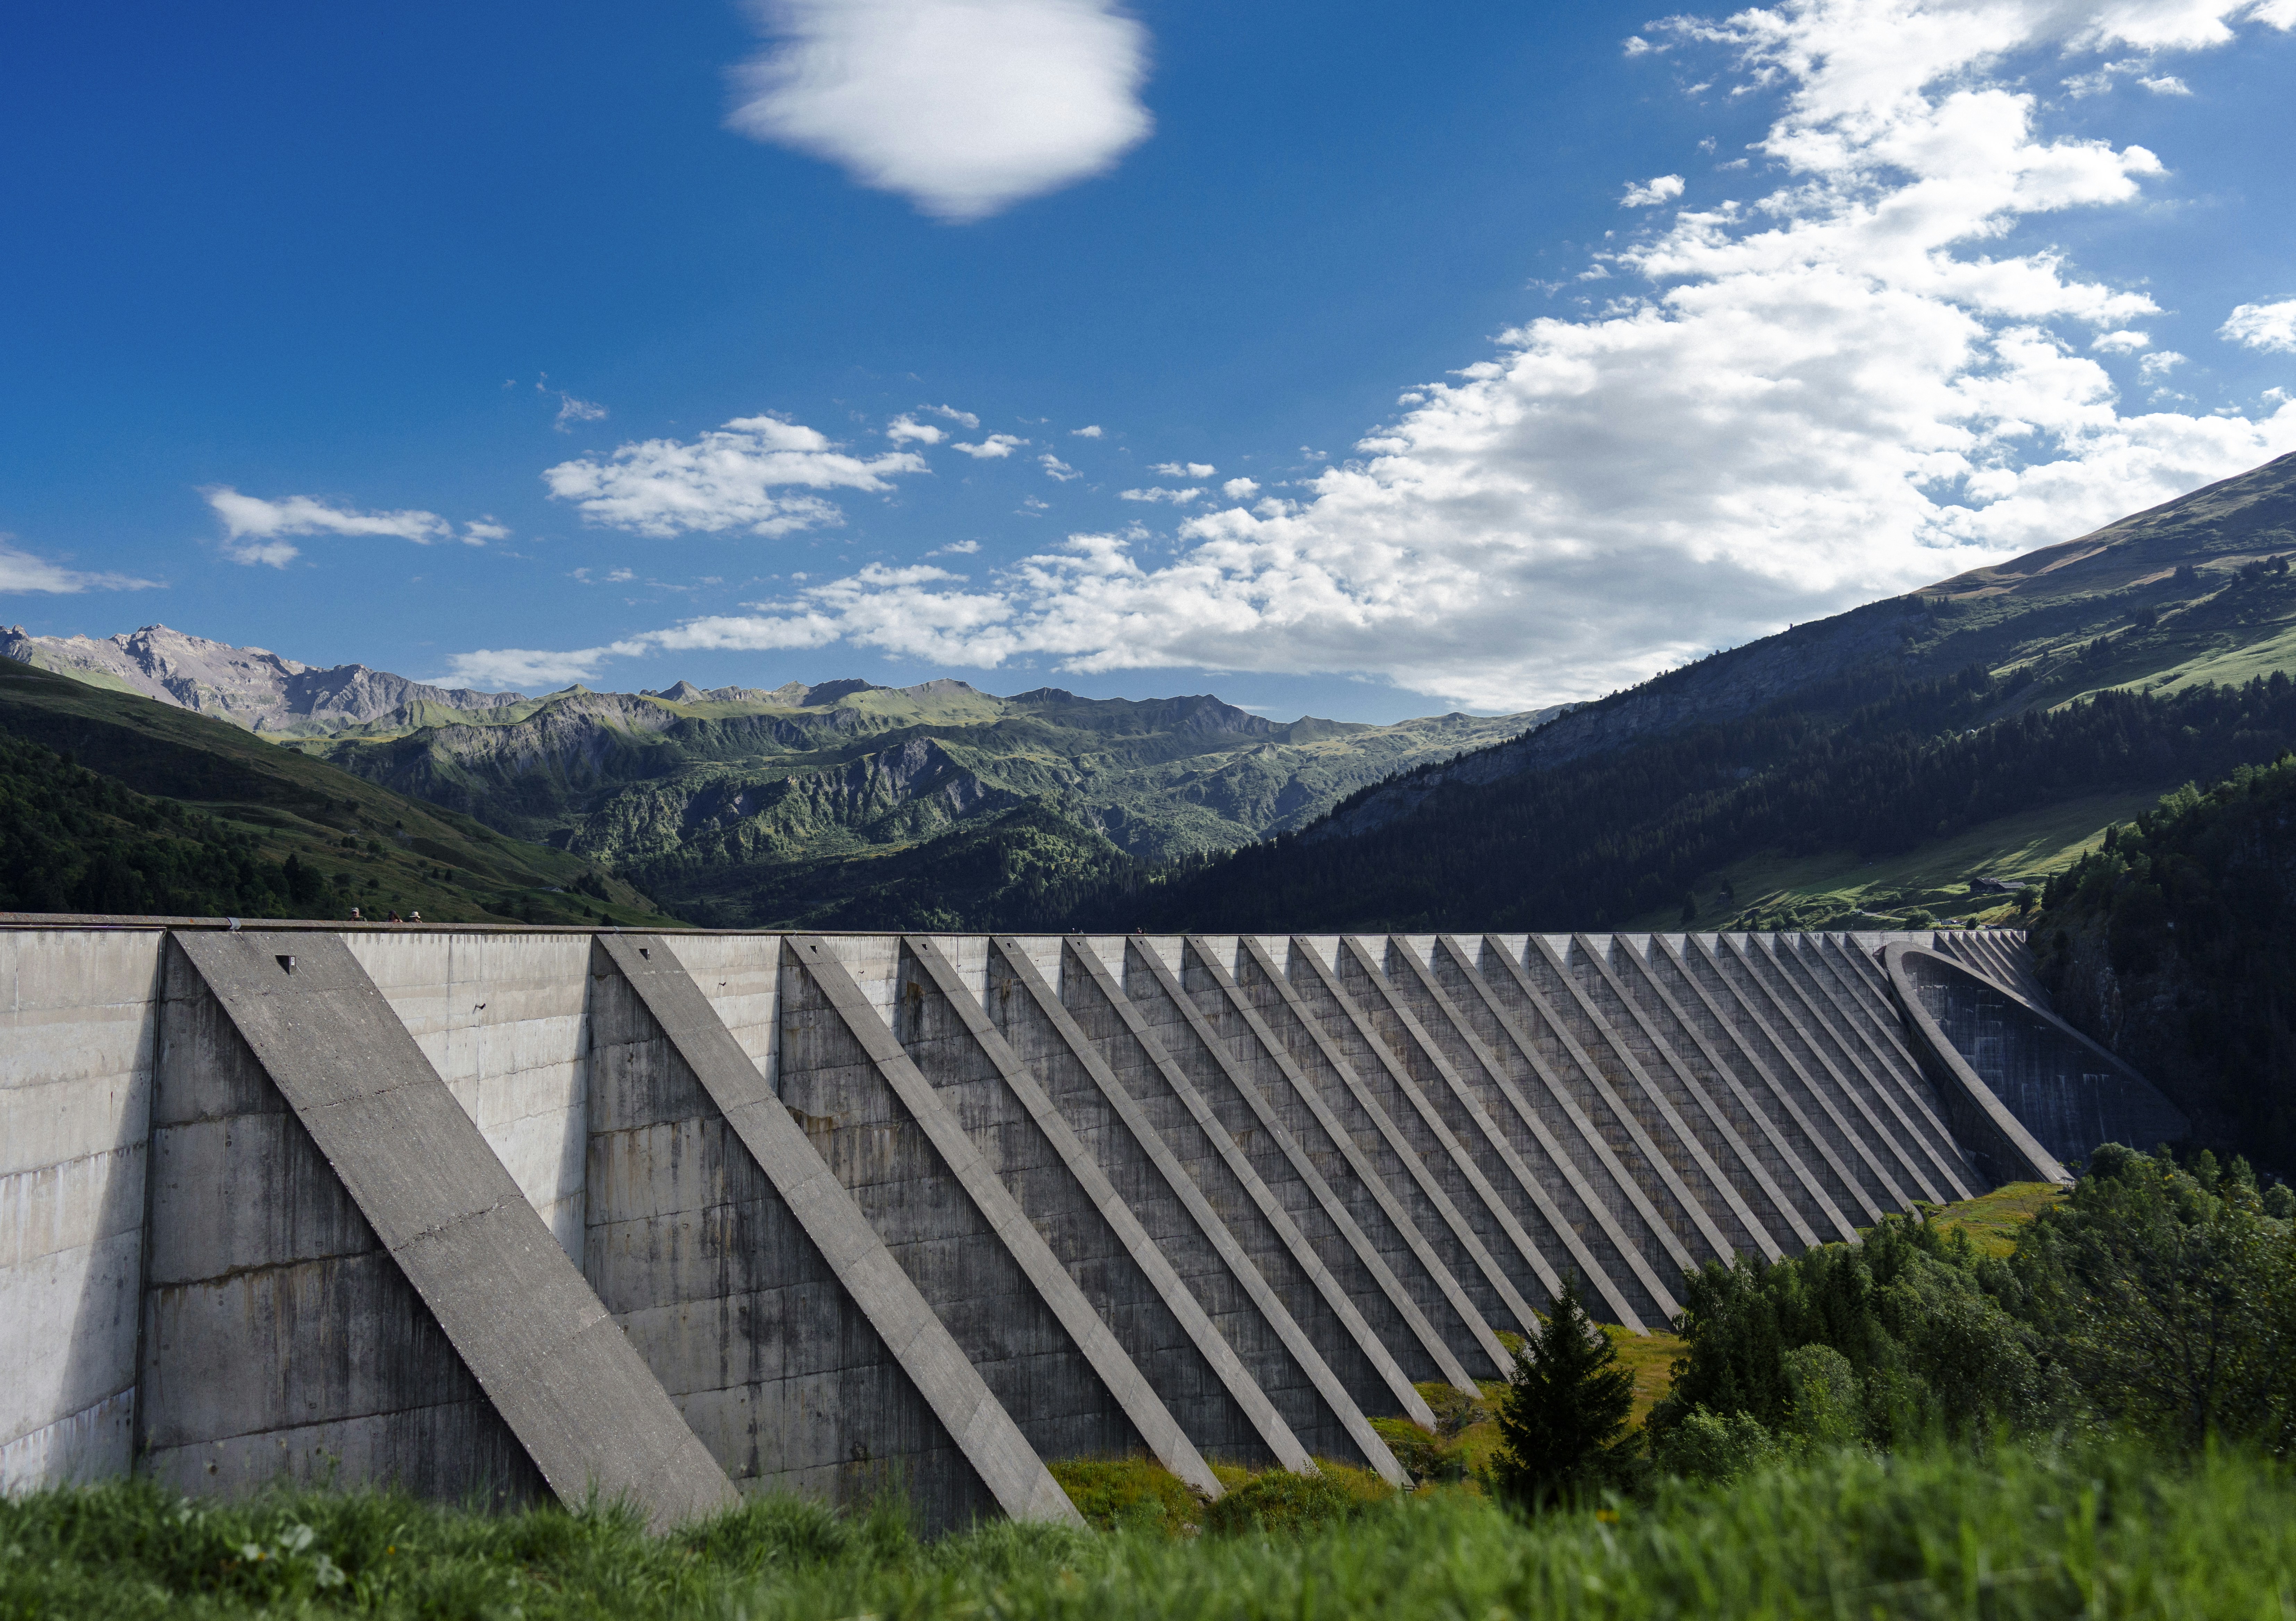 The lac of Roselend dam in France, a place unique in its history and geography